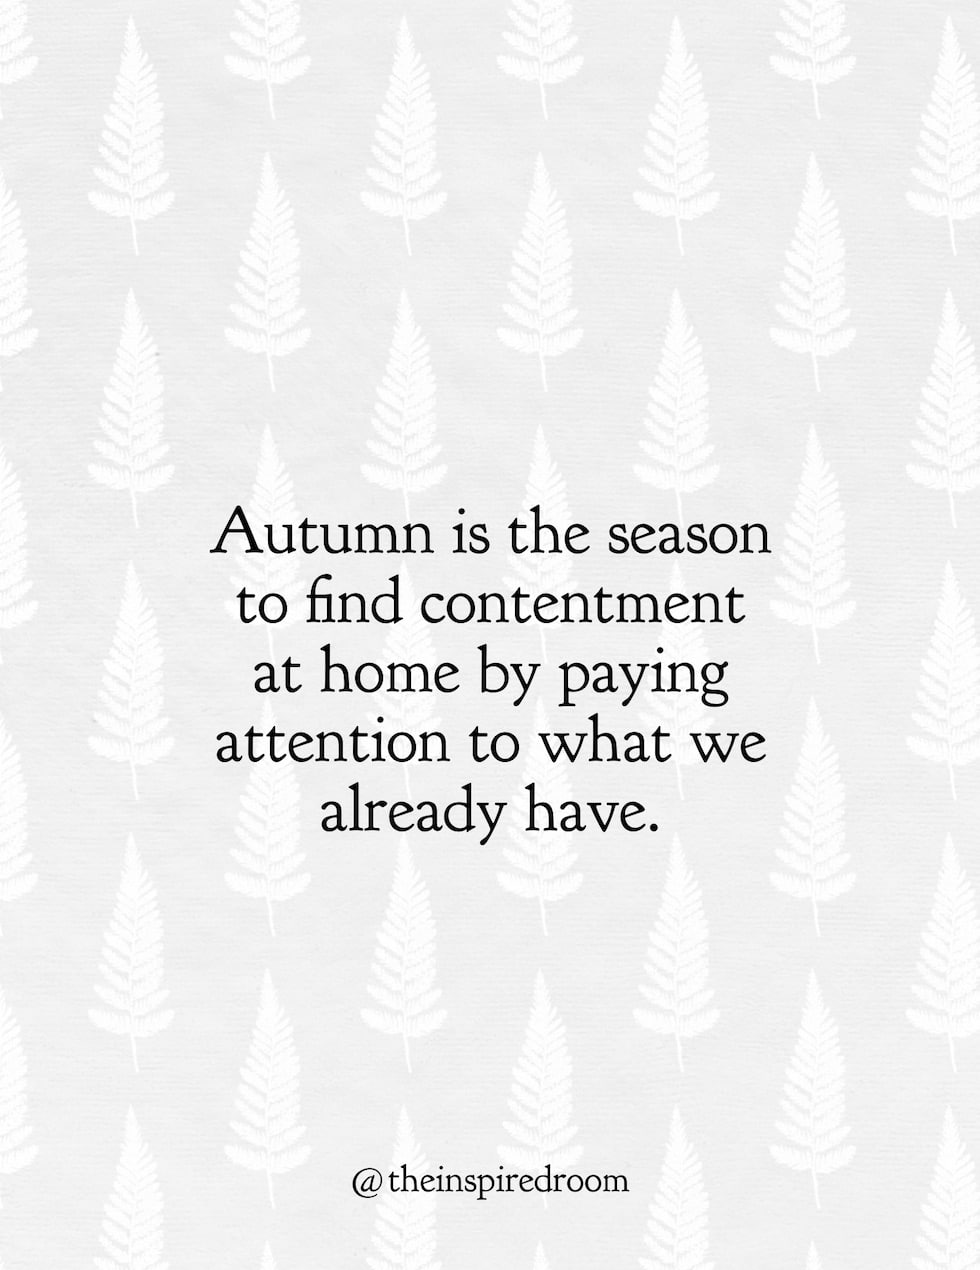 How to Create an Autumn Mindset for our Home (and why social media is distracting us)